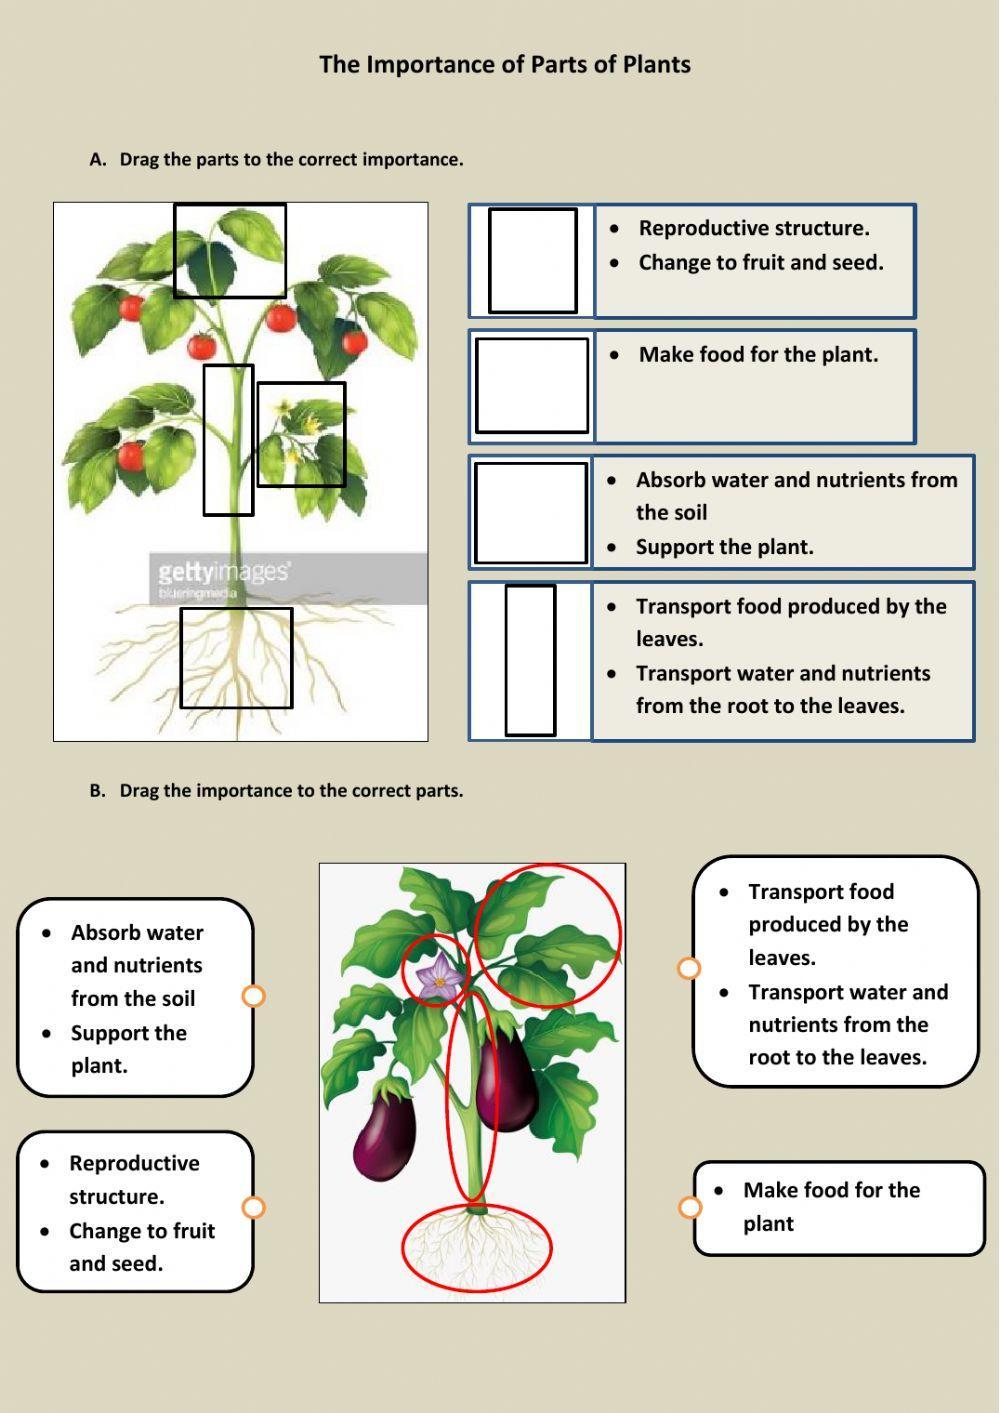 The importancw of parts of plants